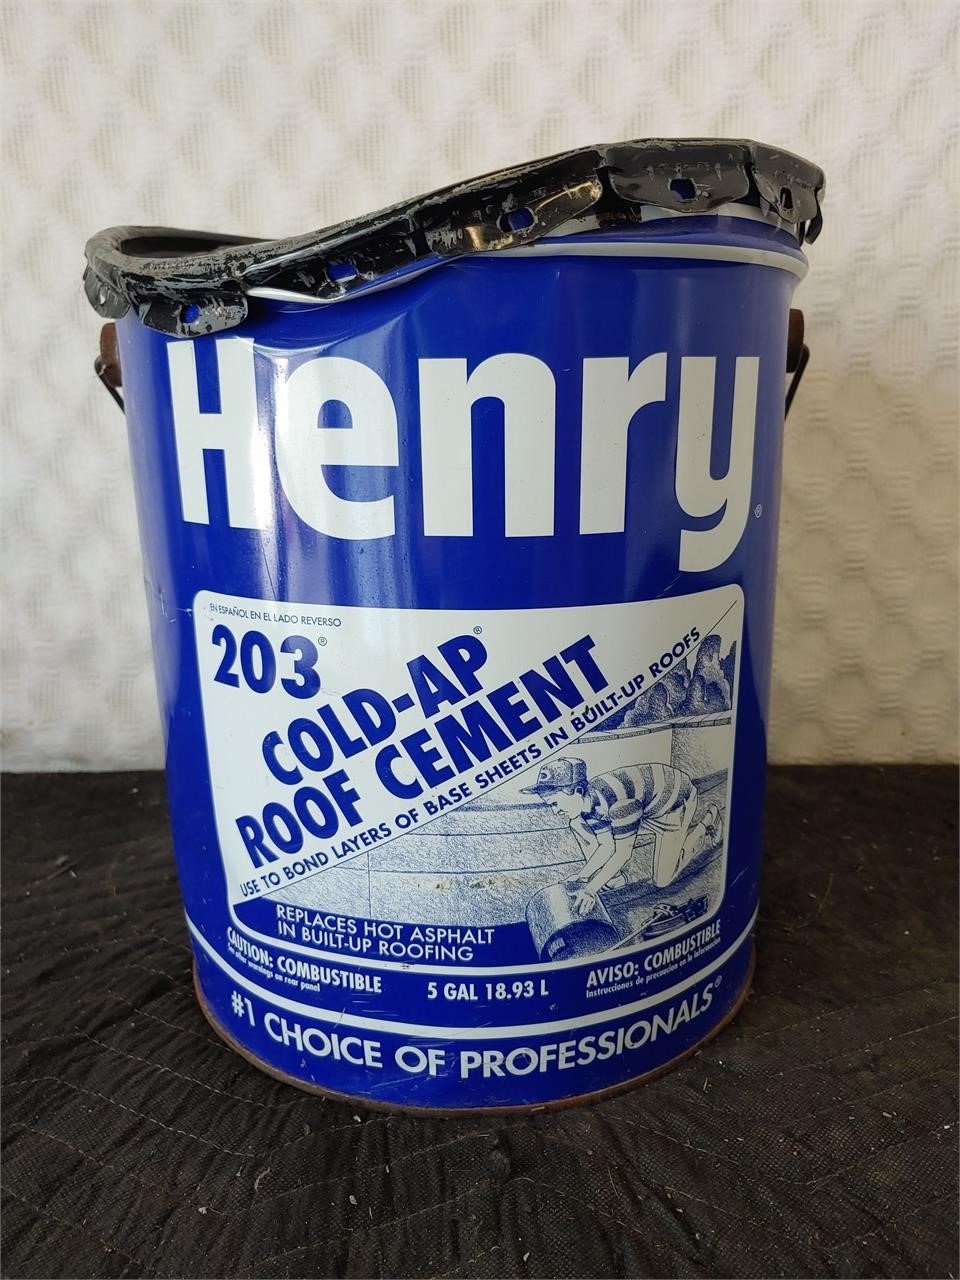 Full 5 Gal Bucket of Henry Cold-AP Roof Cement